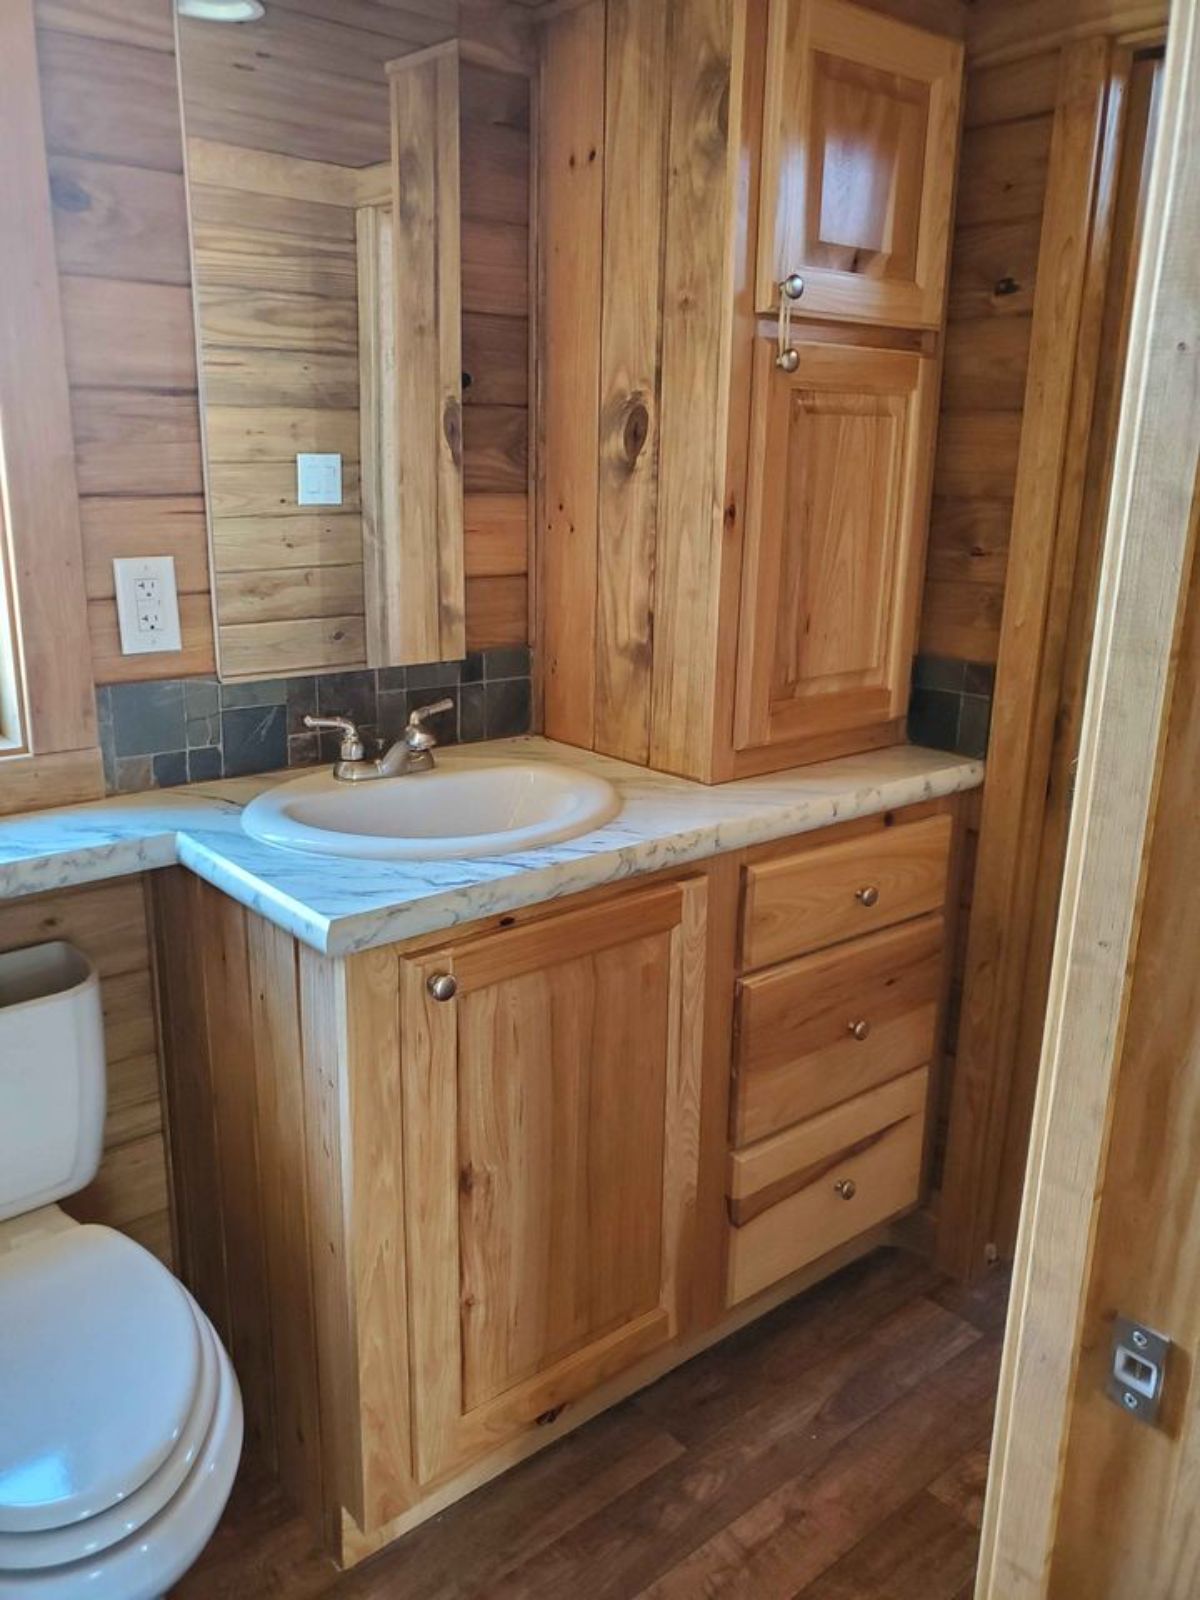 Standard toilet and sink with vanity and mirror along with Wooden storage in bathroom of 399 sf Park Model Tiny House